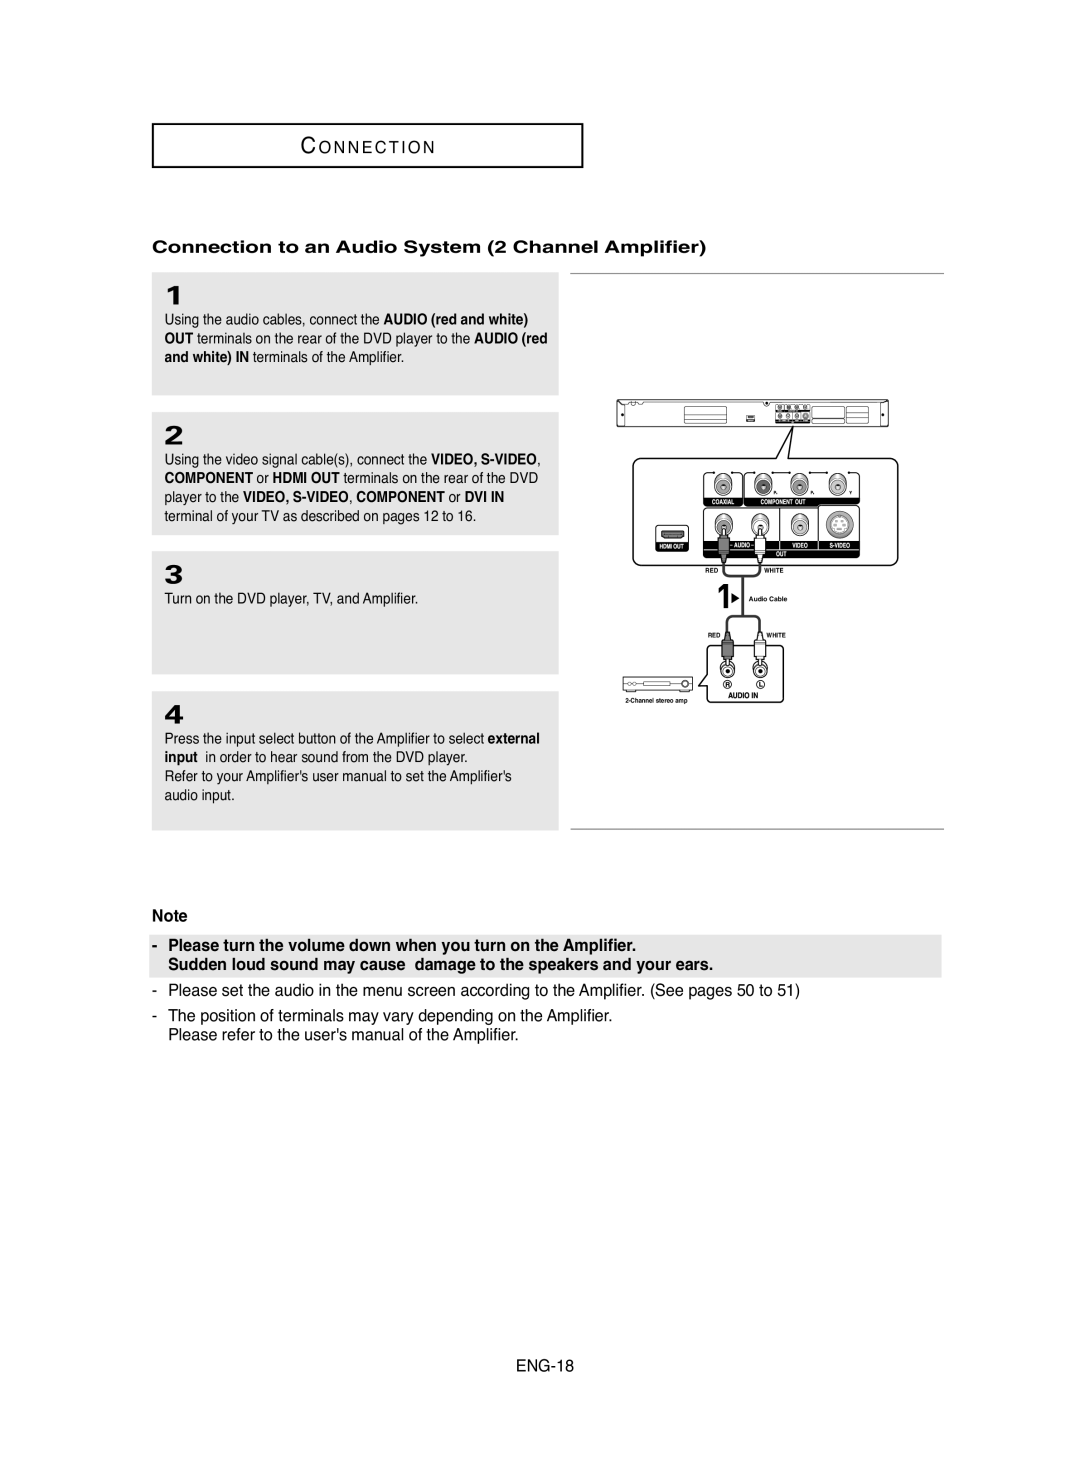 Samsung DVD-HD755 manual C O N N E C T I O N, Connection to an Audio System 2 Channel Amplifier, ENG-18 